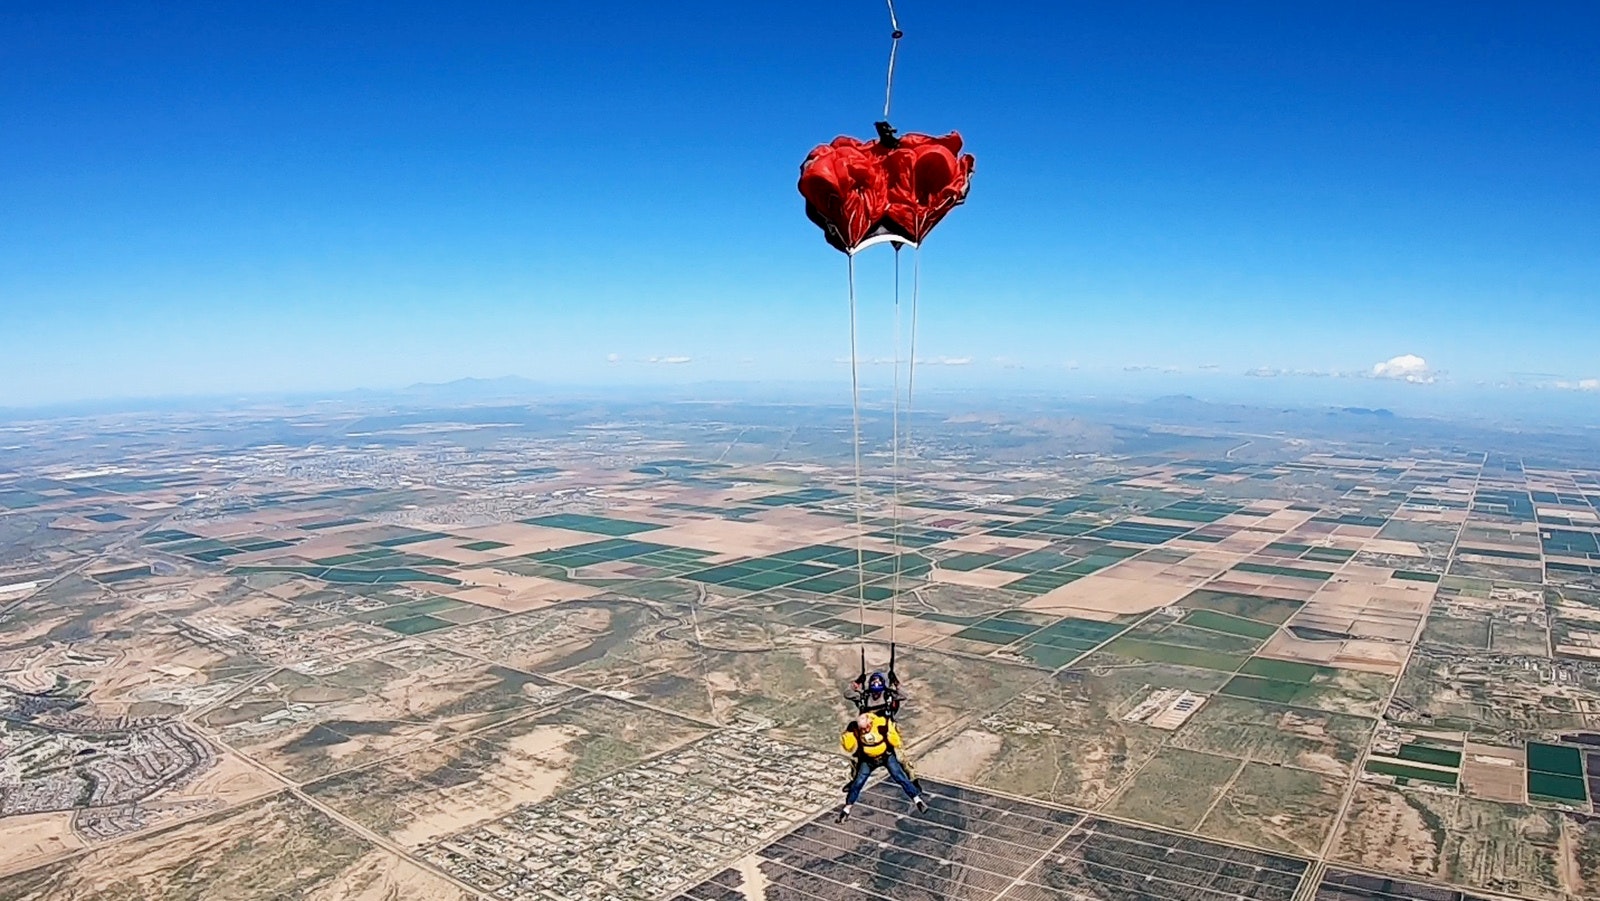 Ernie Herrera pulls his parachute during his first skydiving jump.